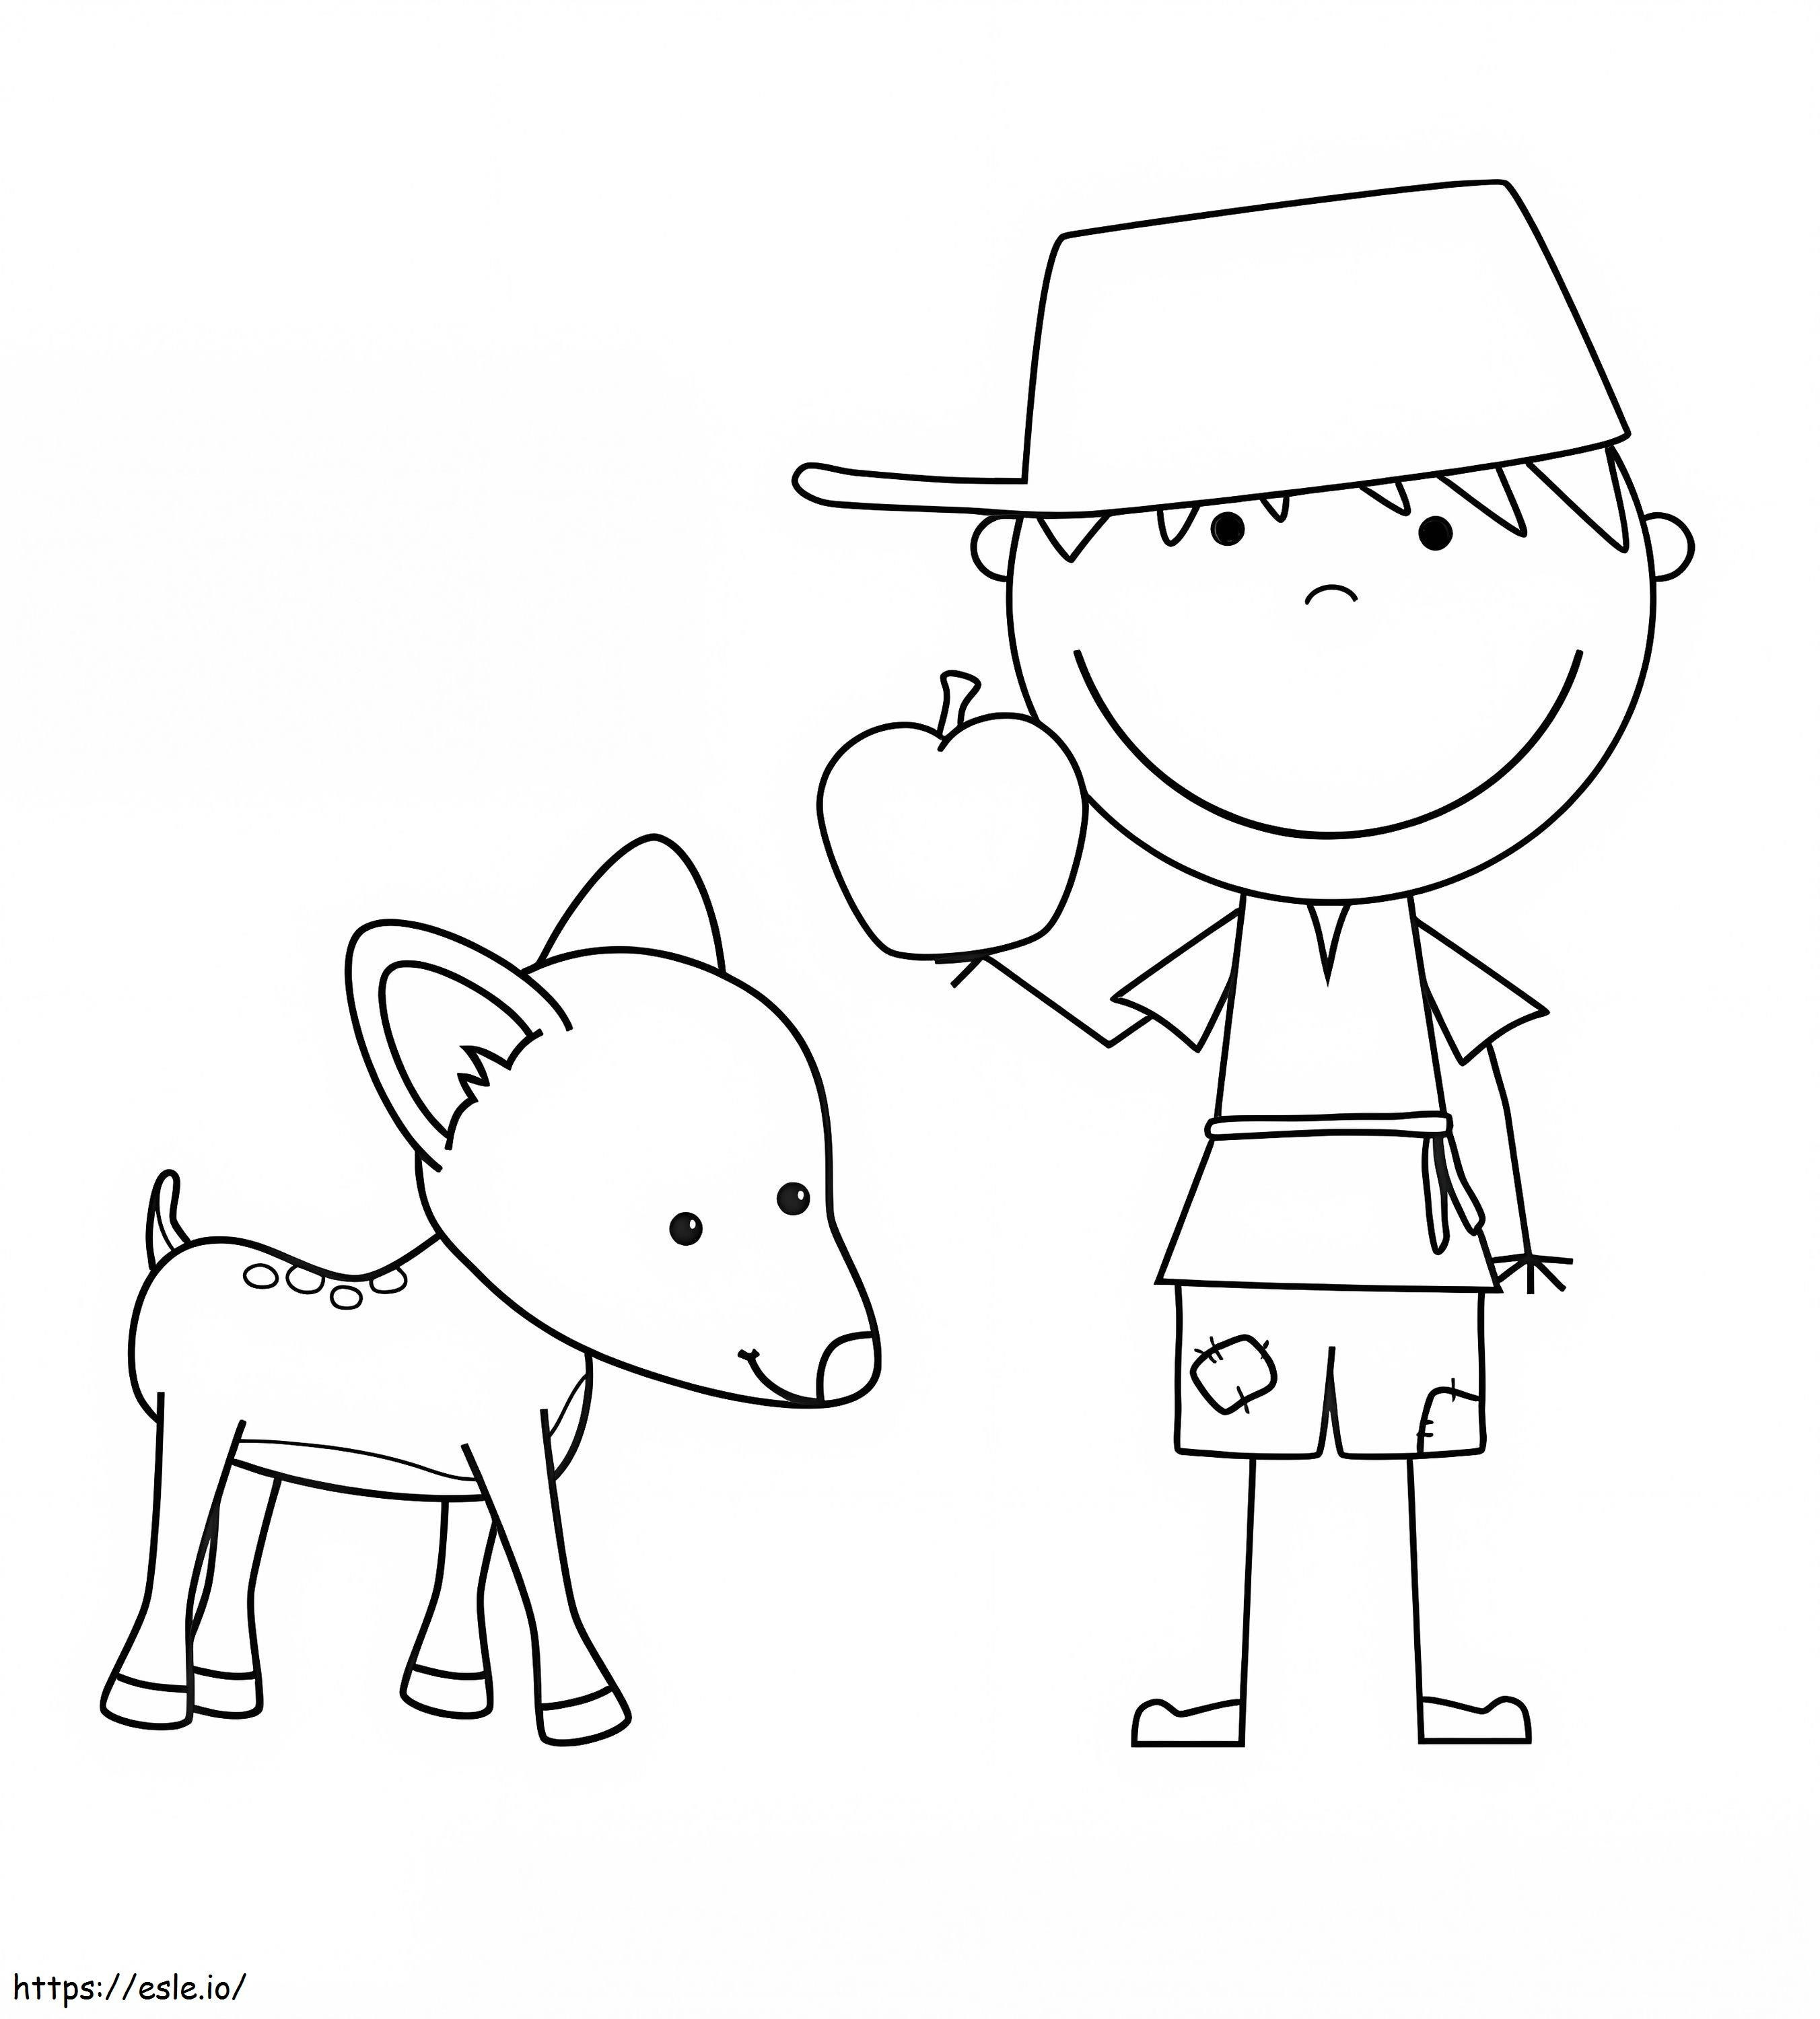 Johnny Appleseed And A Deer coloring page